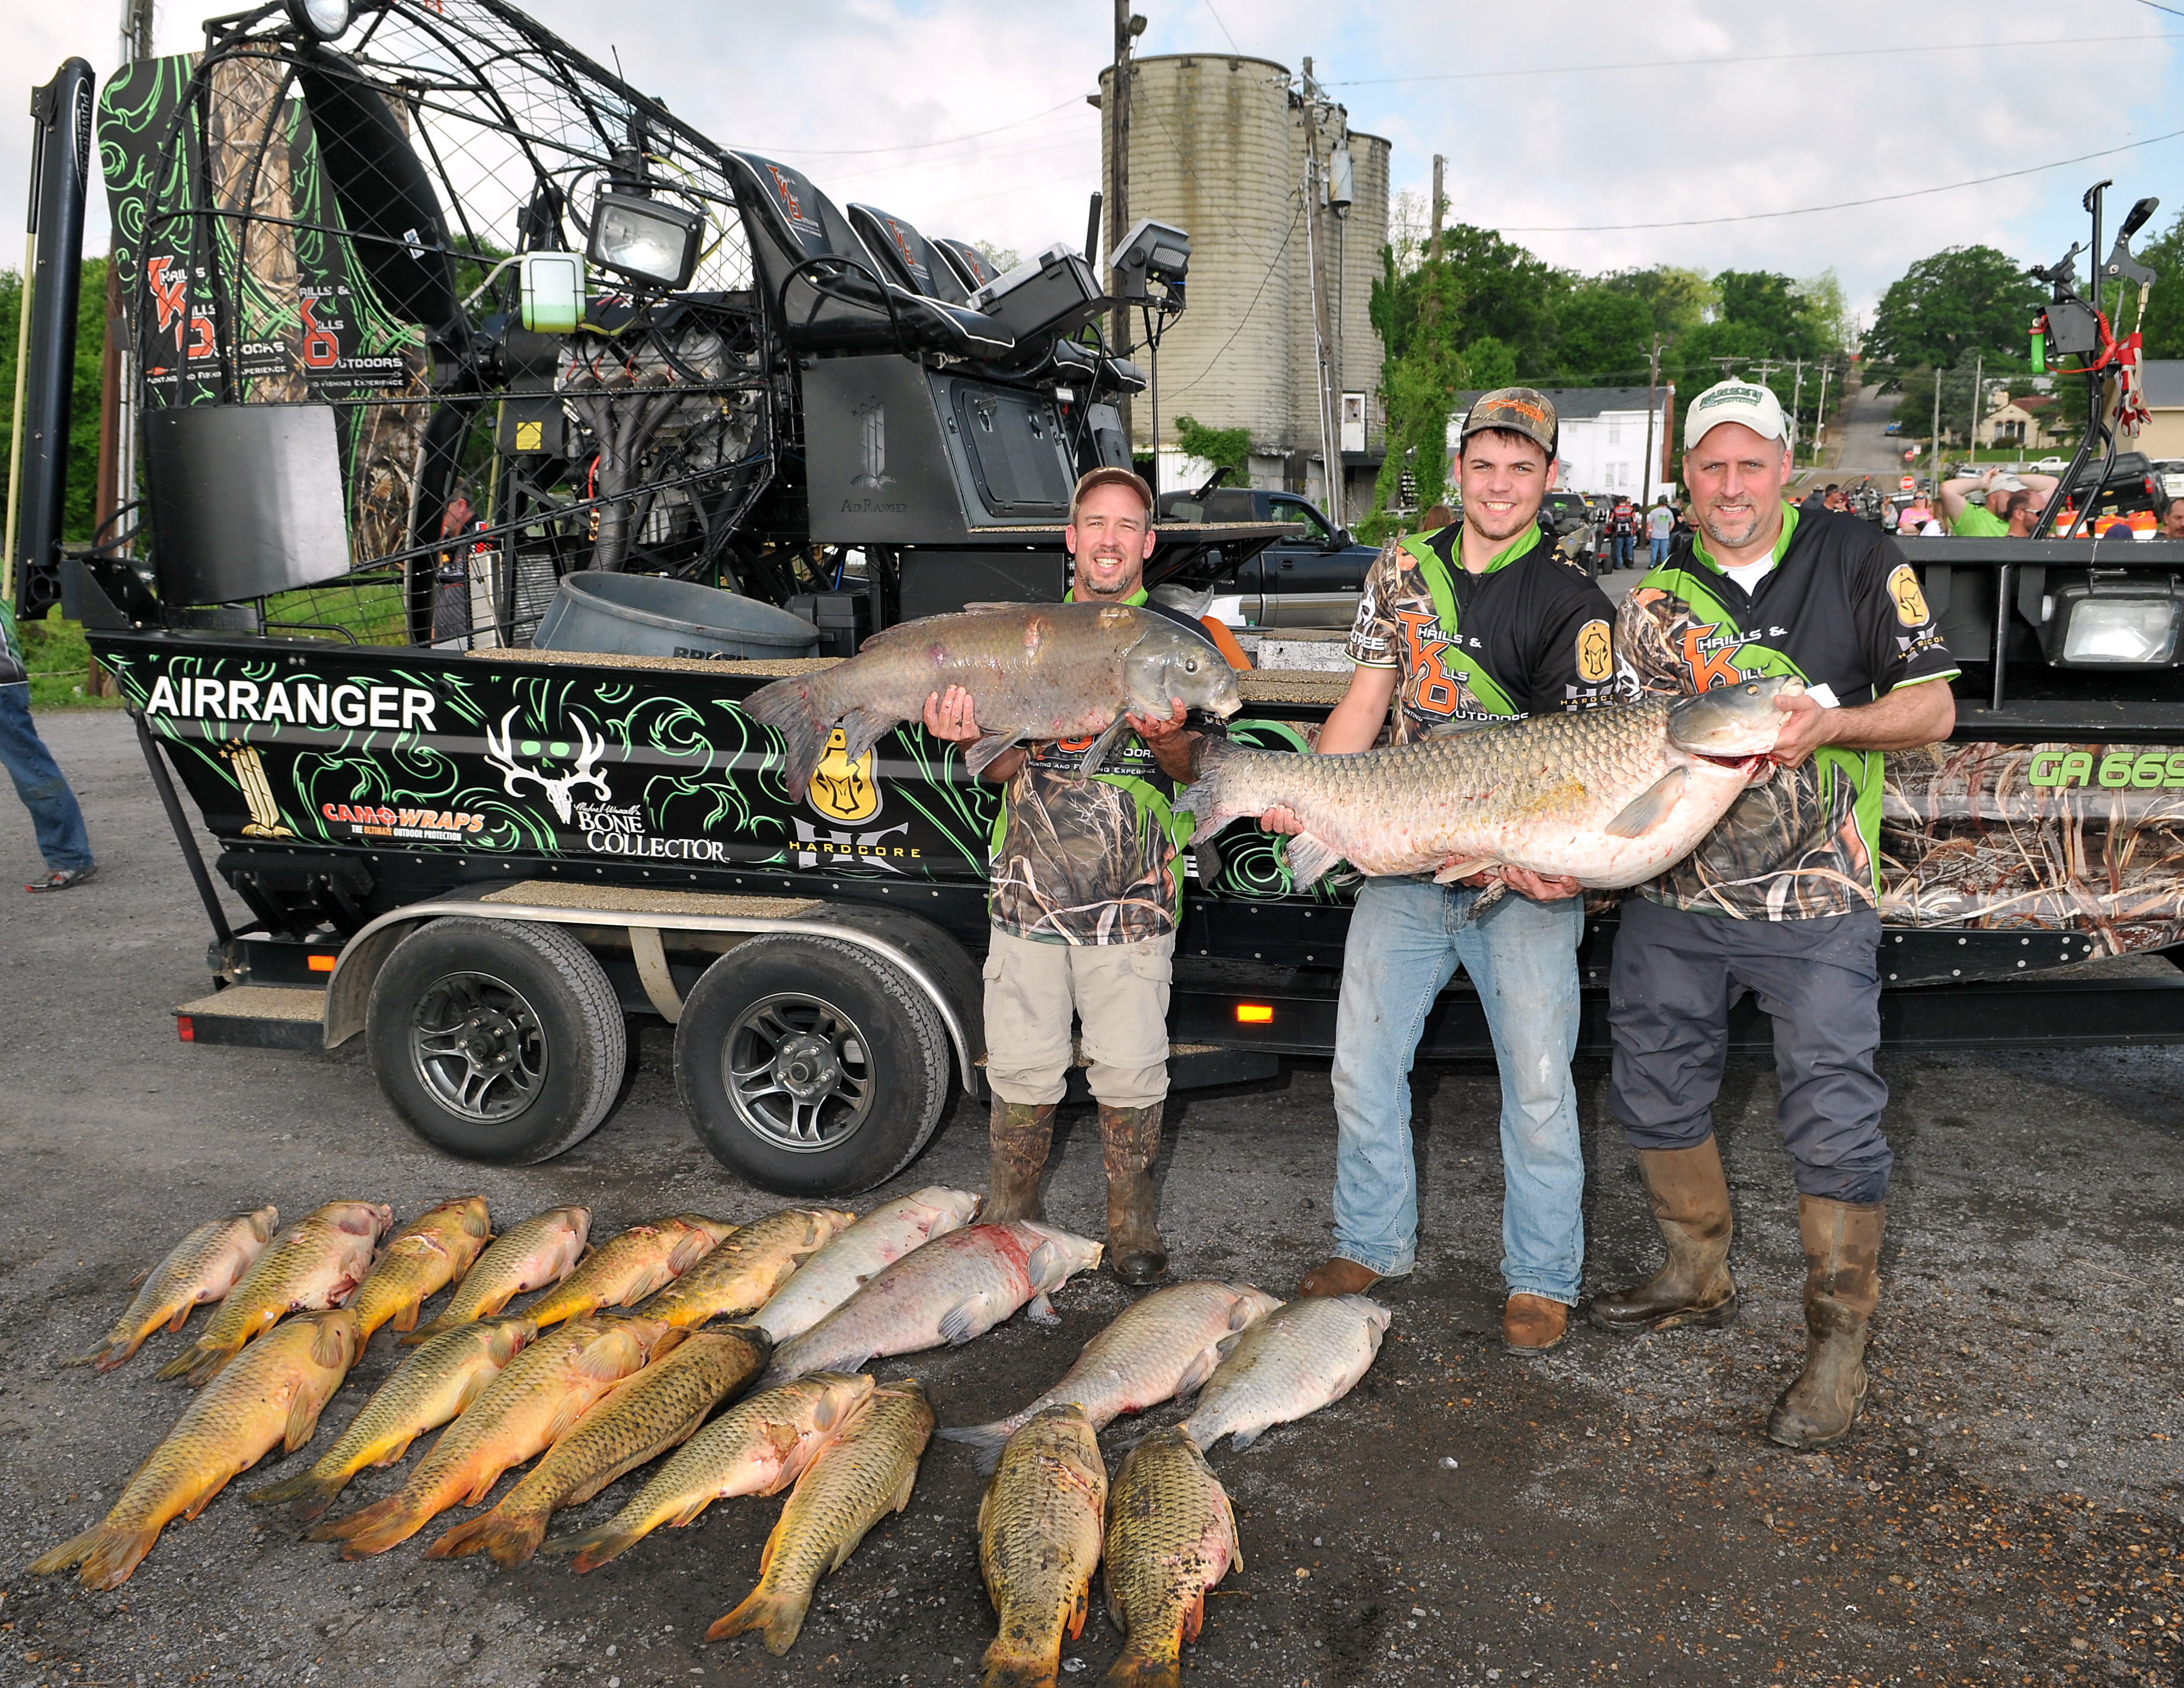 Make Bowfishing Plans Now for 17th Muzzy Classic on Guntersville